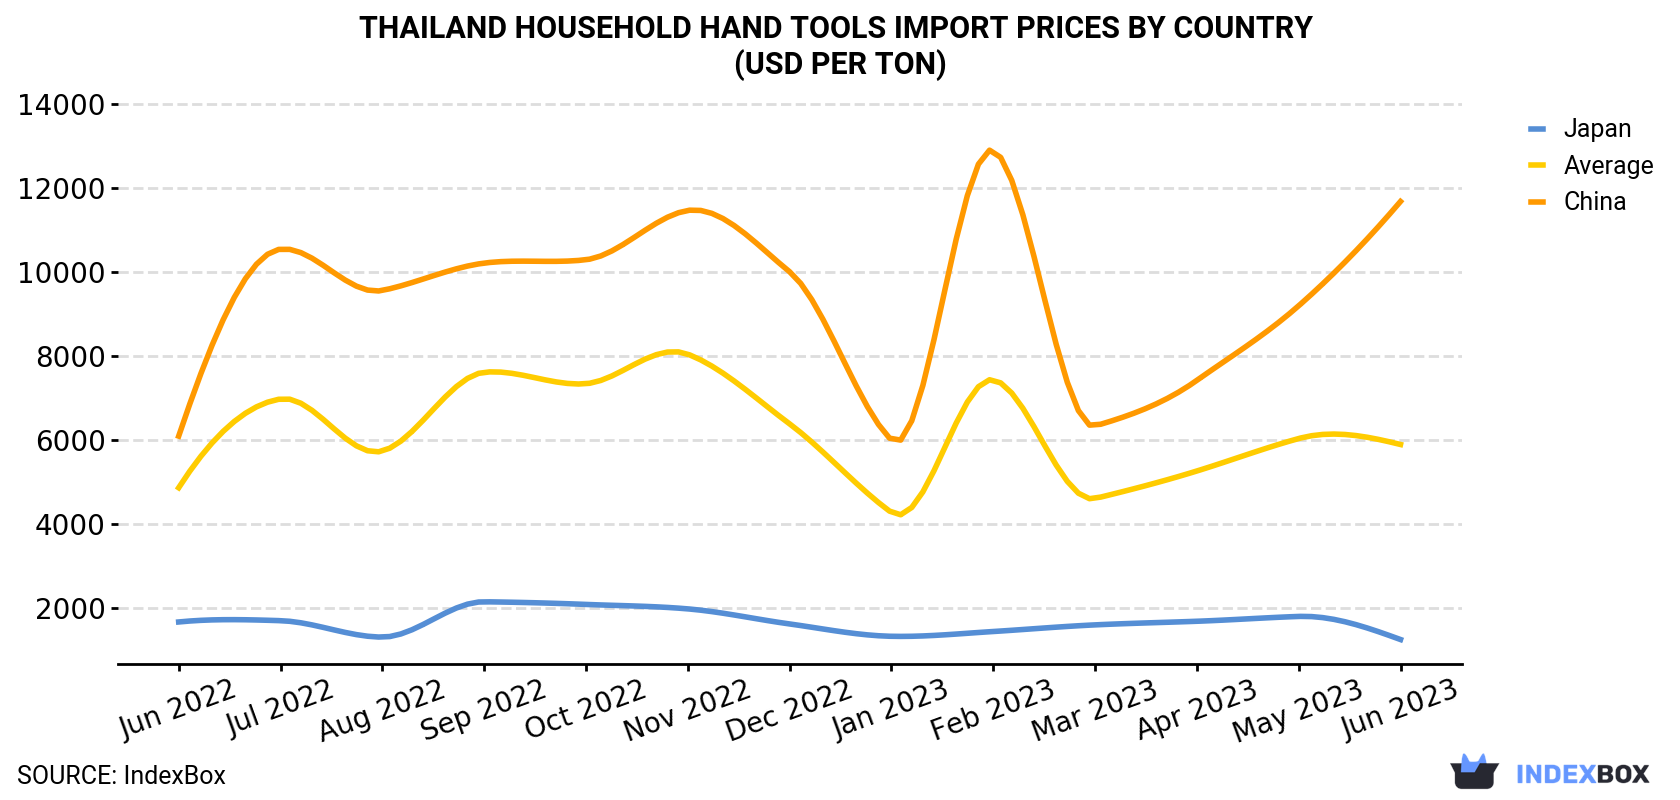 Thailand Household Hand Tools Import Prices By Country (USD Per Ton)